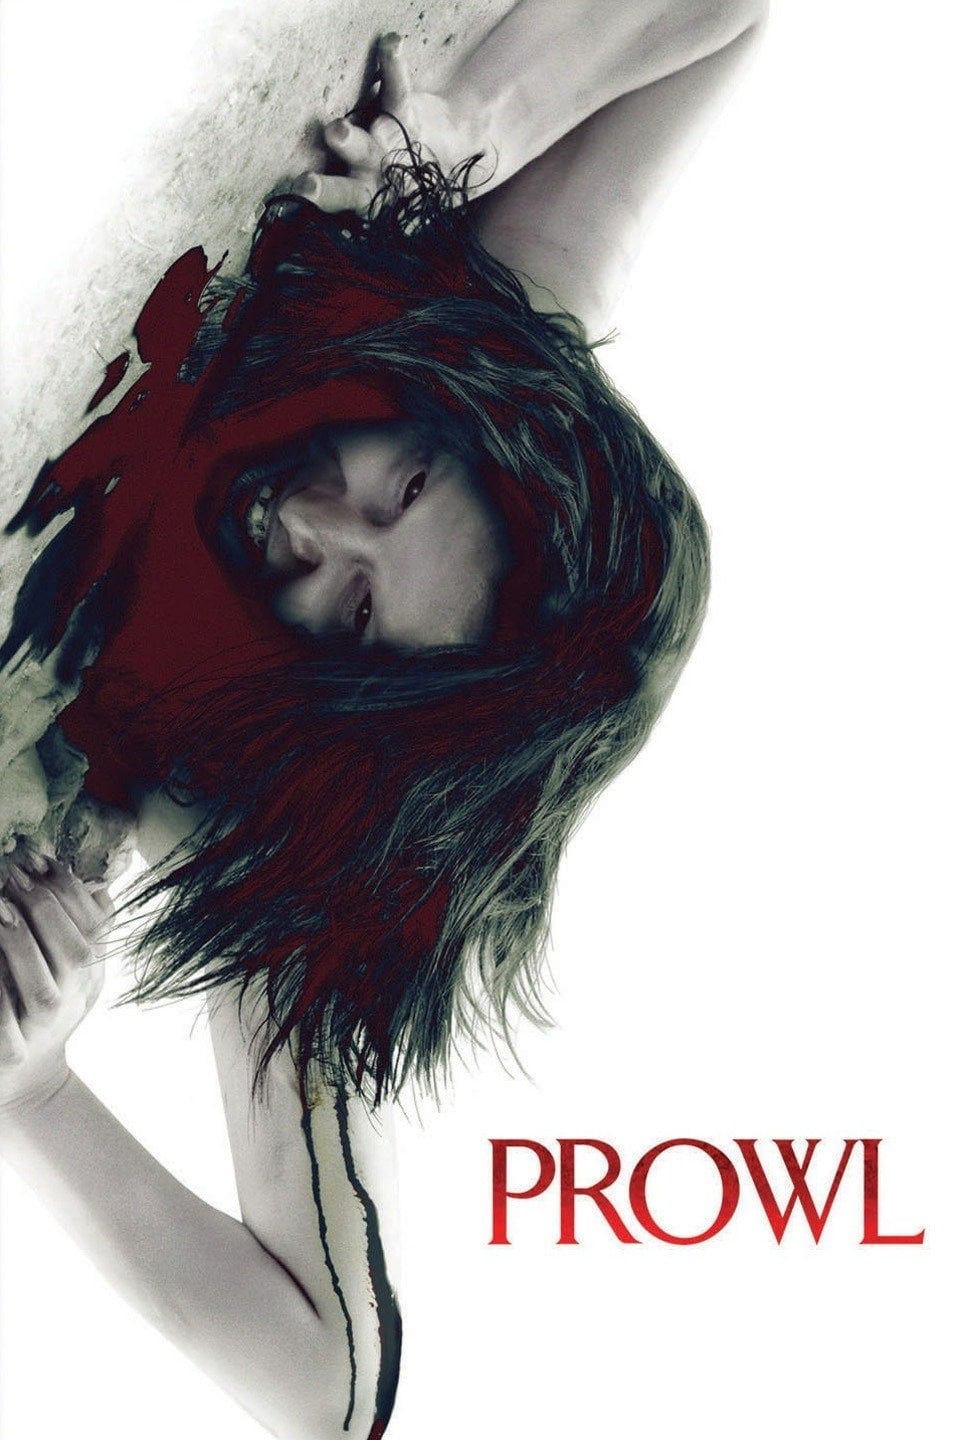 Prowl (2010) | Poster